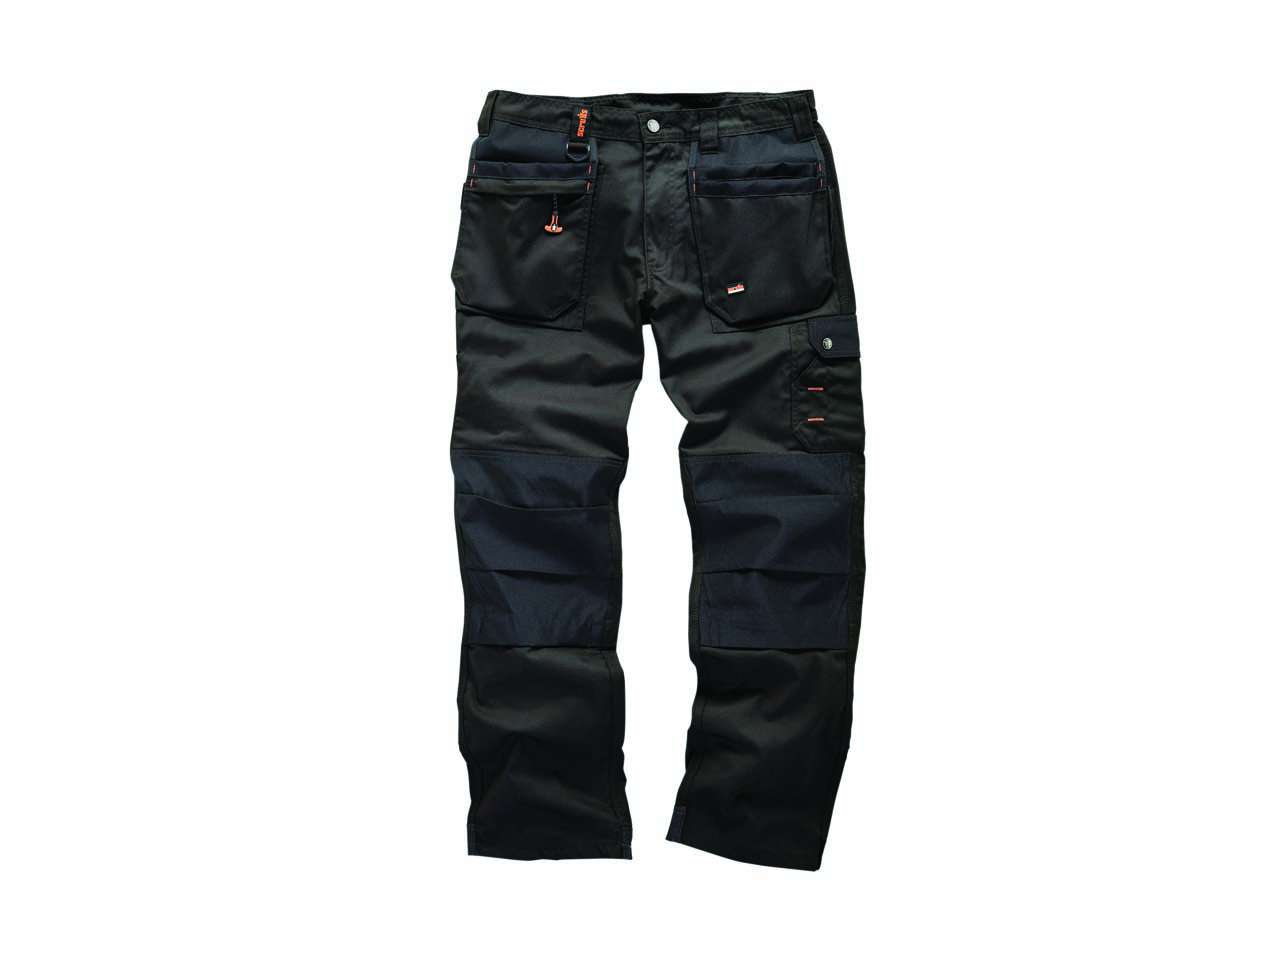 Scruffs Trade Flex Trouser Black - All Clothing & Protection | Uniforms,  Workwear, Specialist Equipment & PPE Suppliers